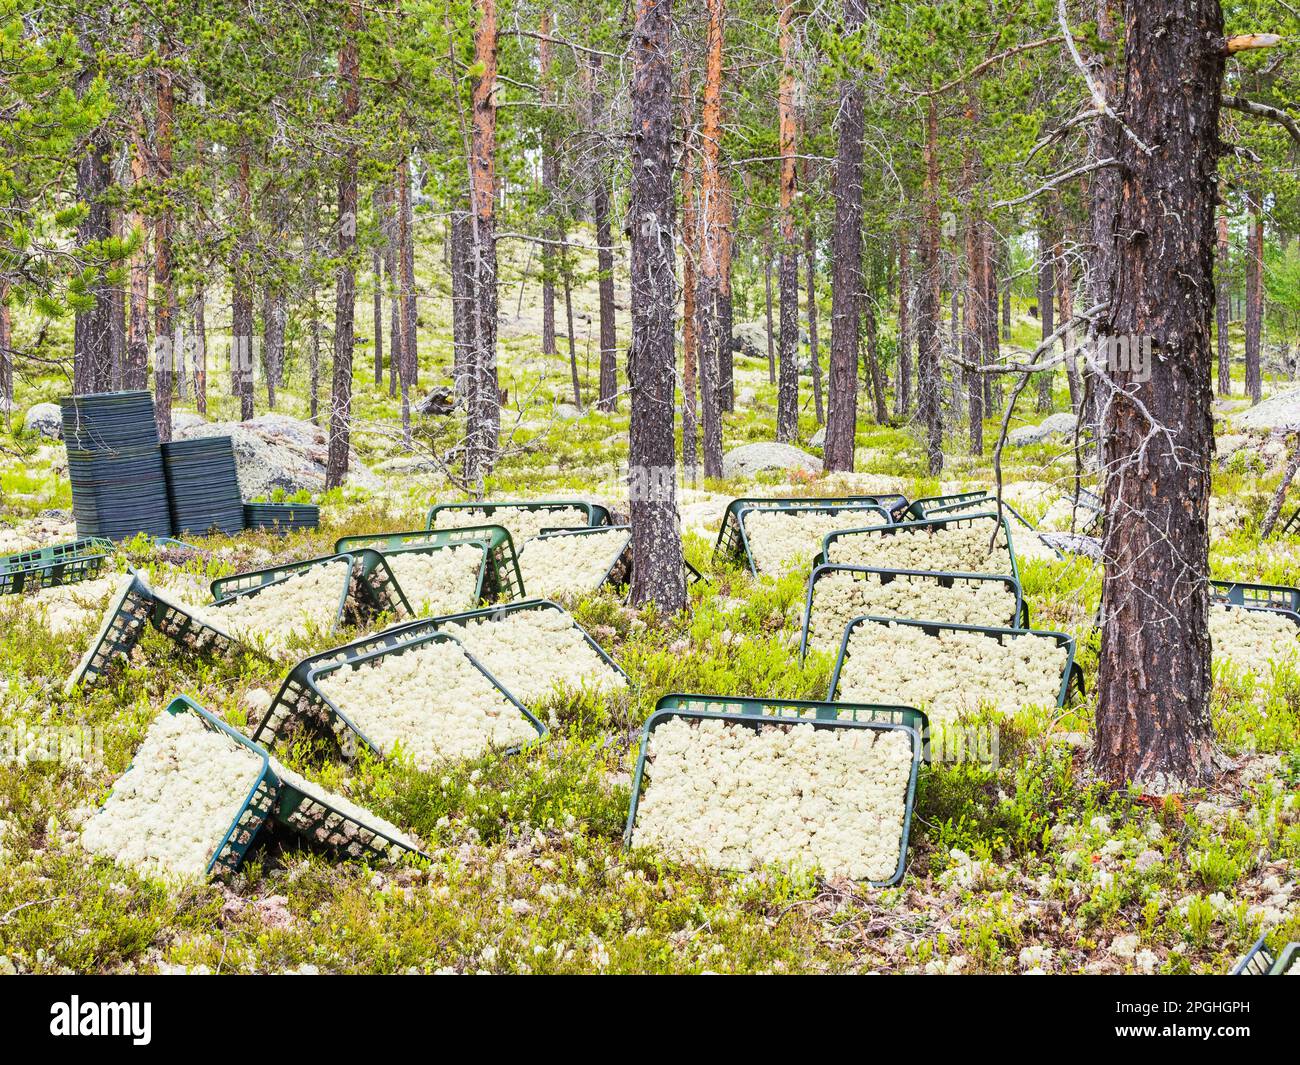 Collecting moss and tree trunks in a tranquil Norwegian forest, industry harvests the lands natural growth day after day. Stock Photo